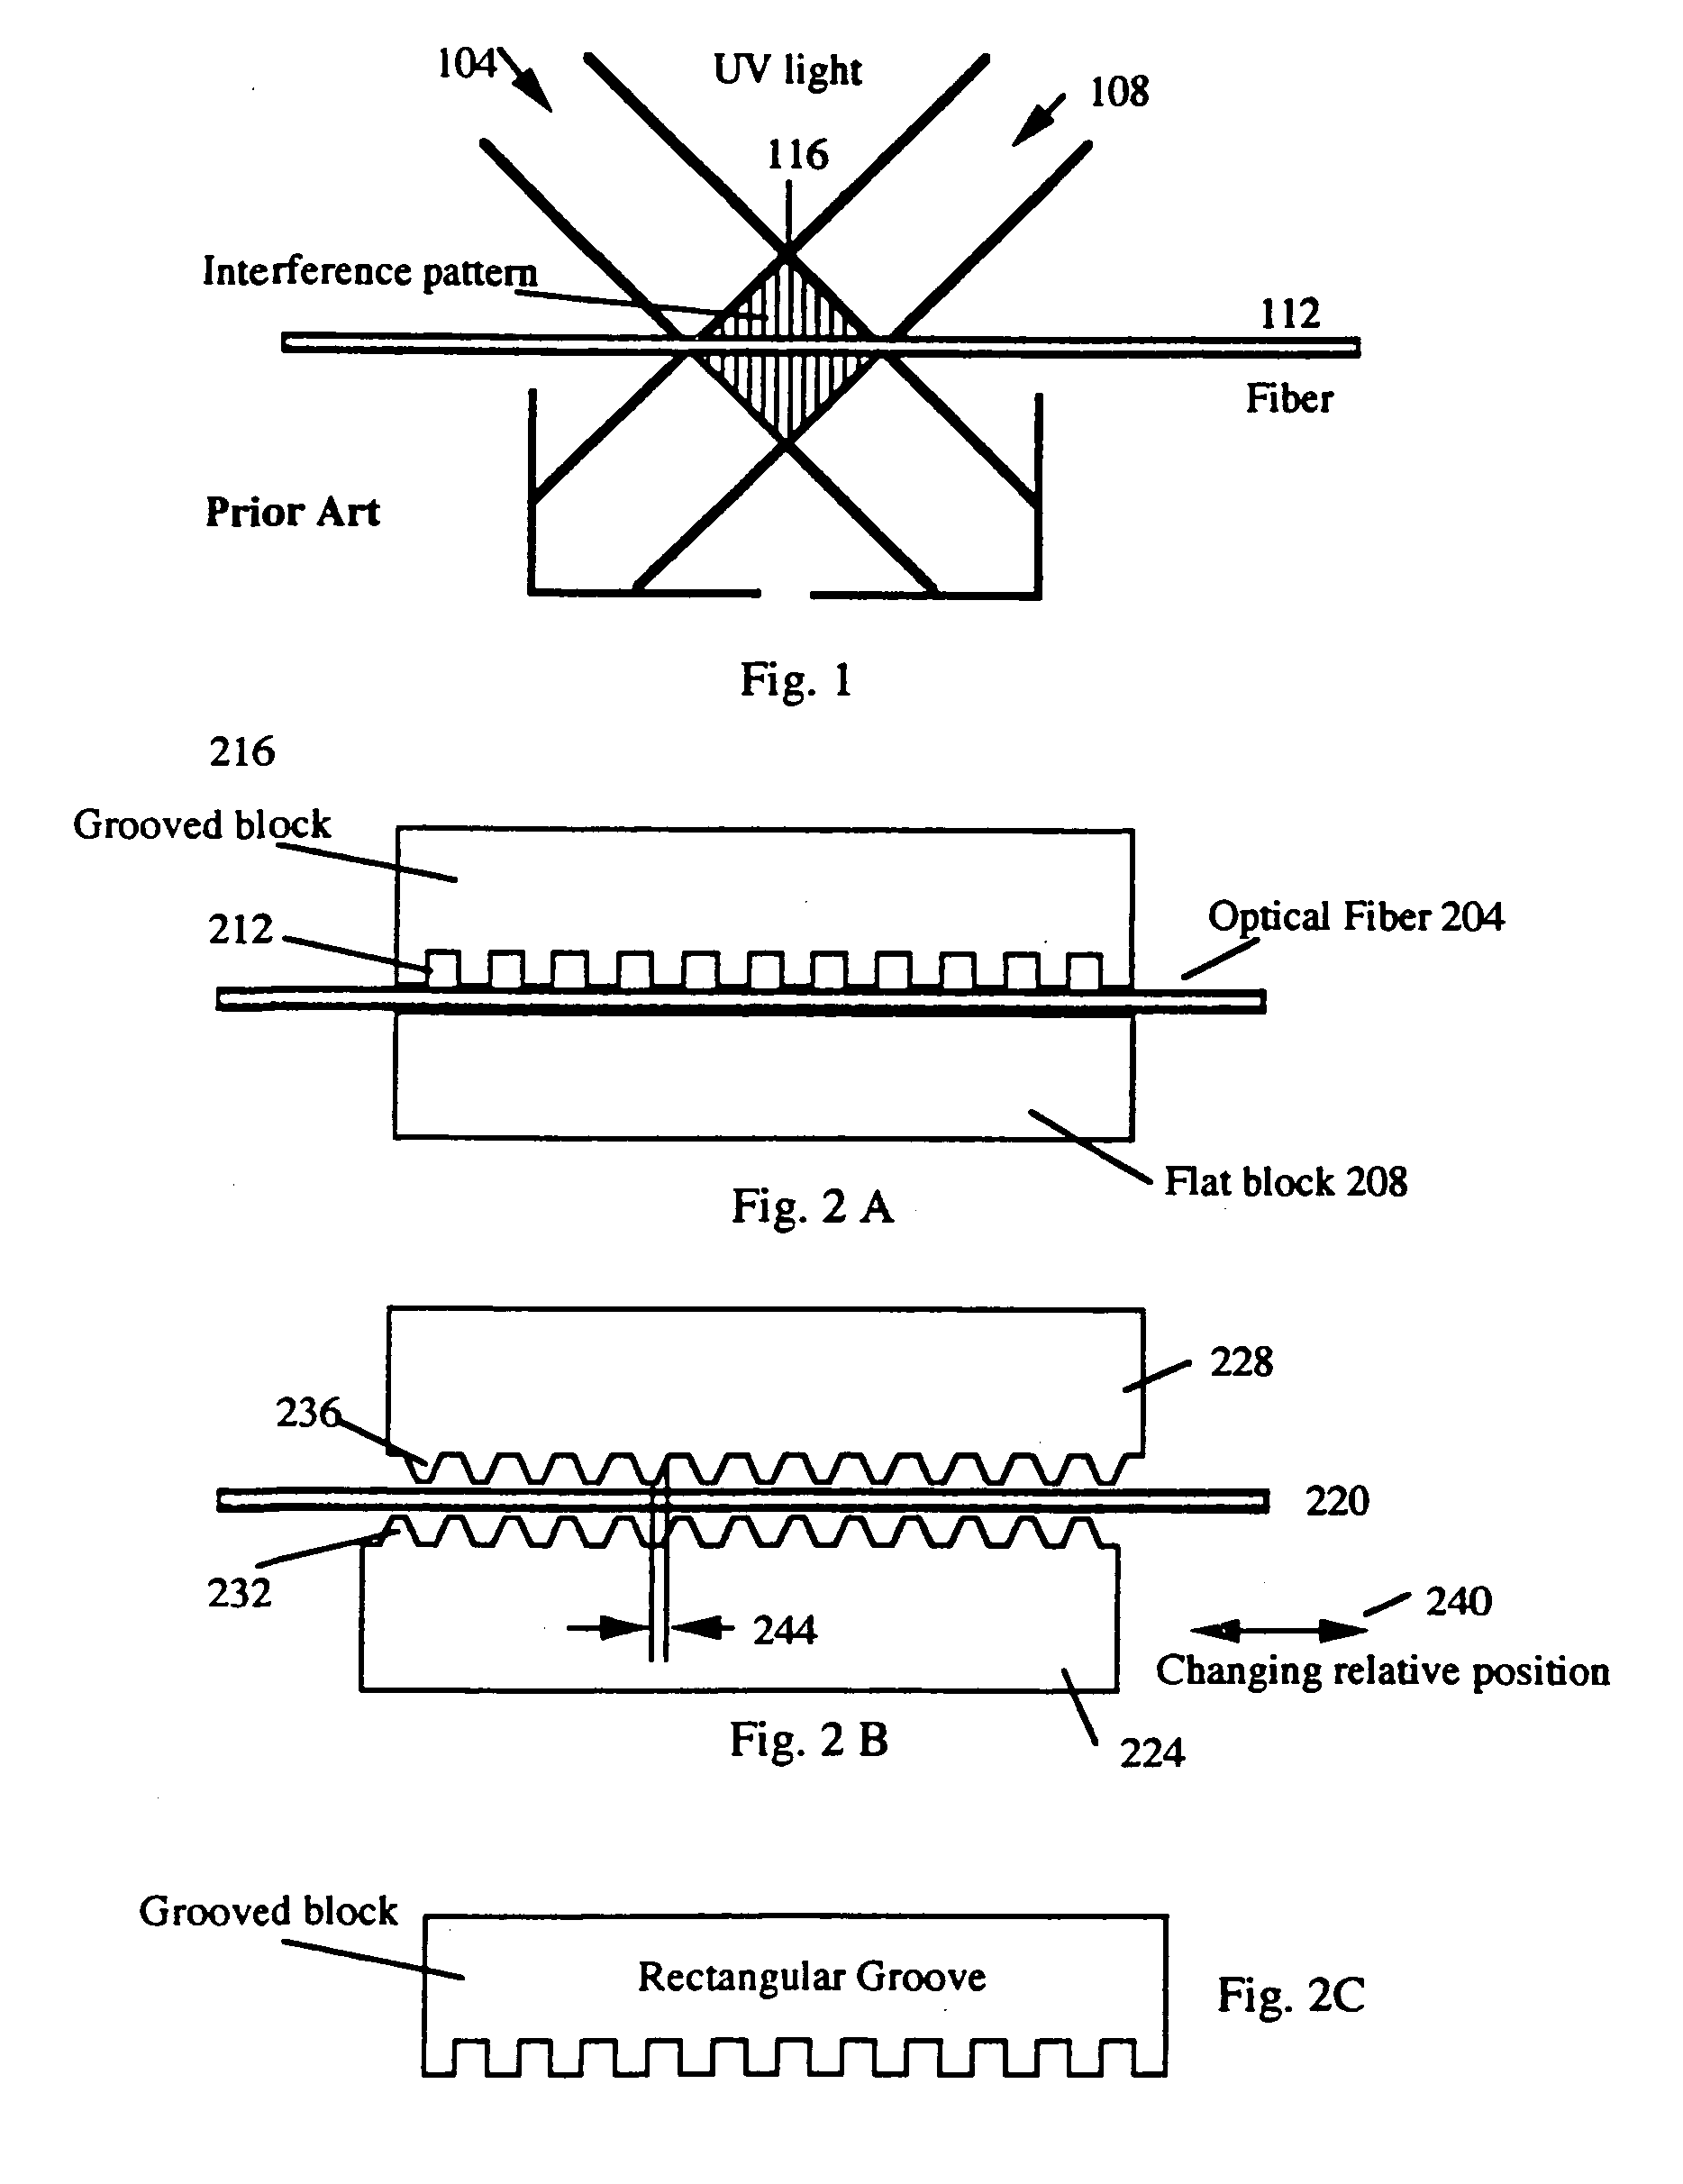 Devices based on optical waveguides with adjustable Bragg gratings